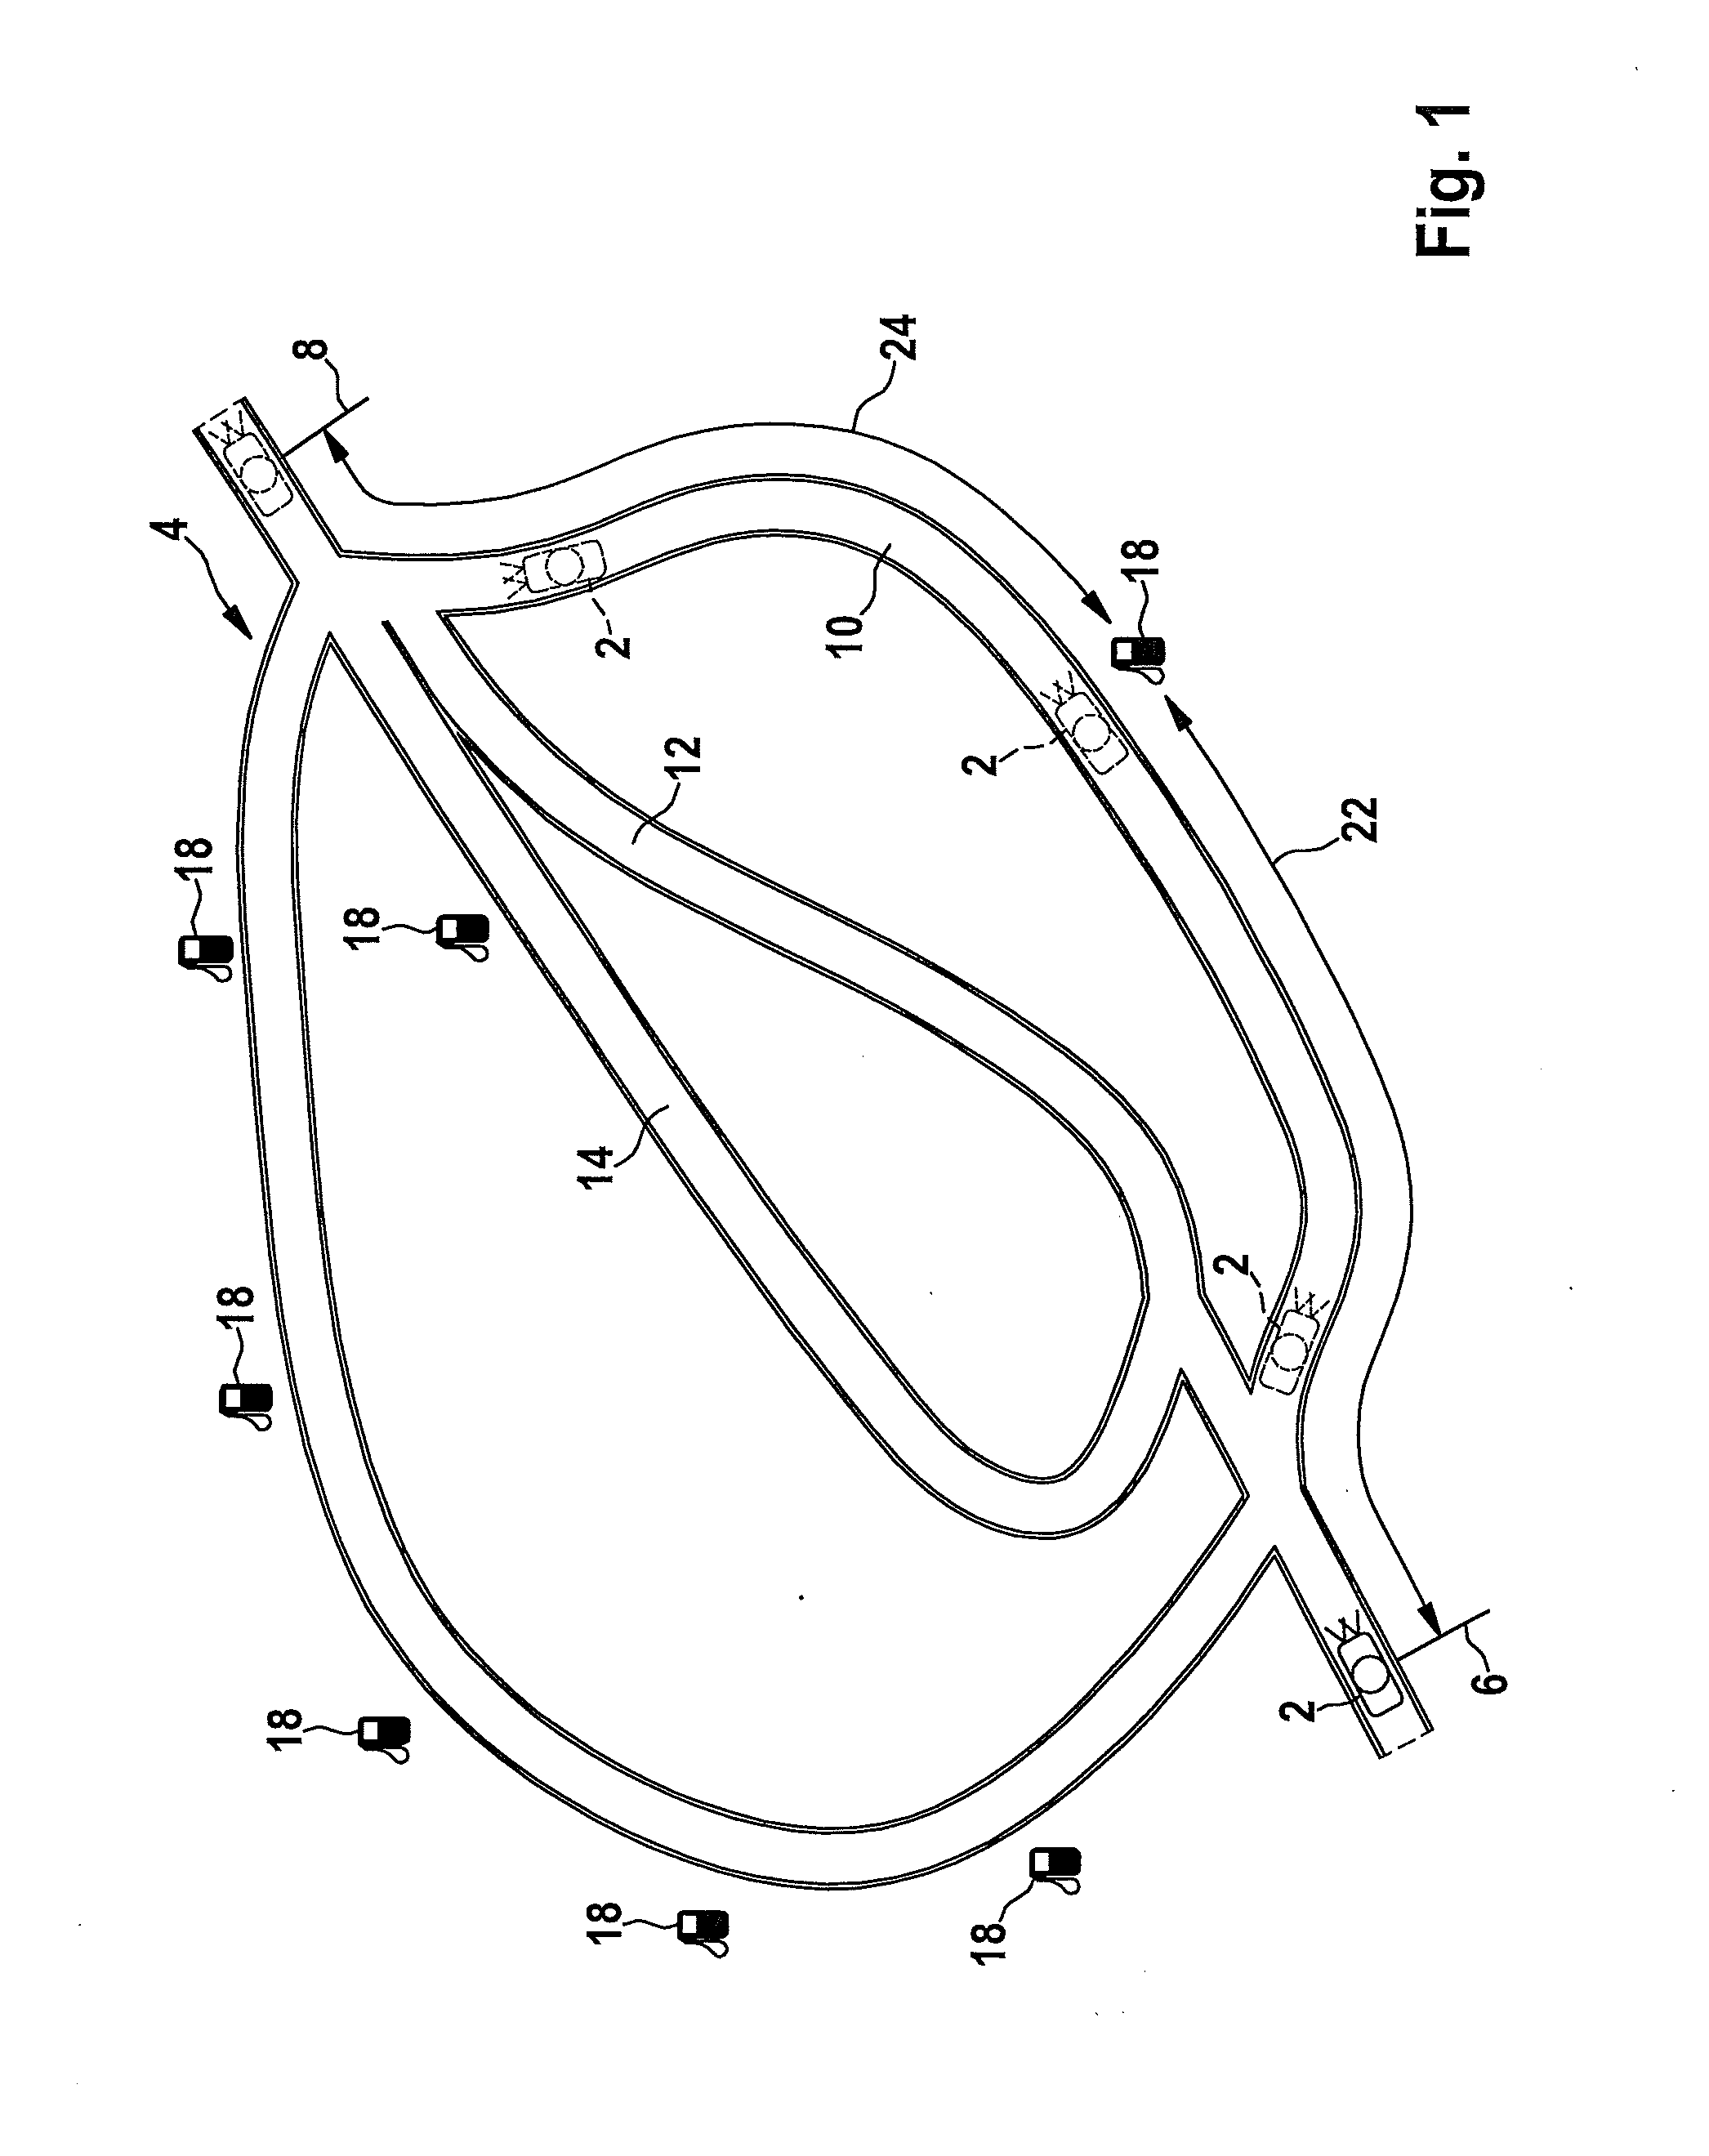 Method for implementing an energy management of a vehicle